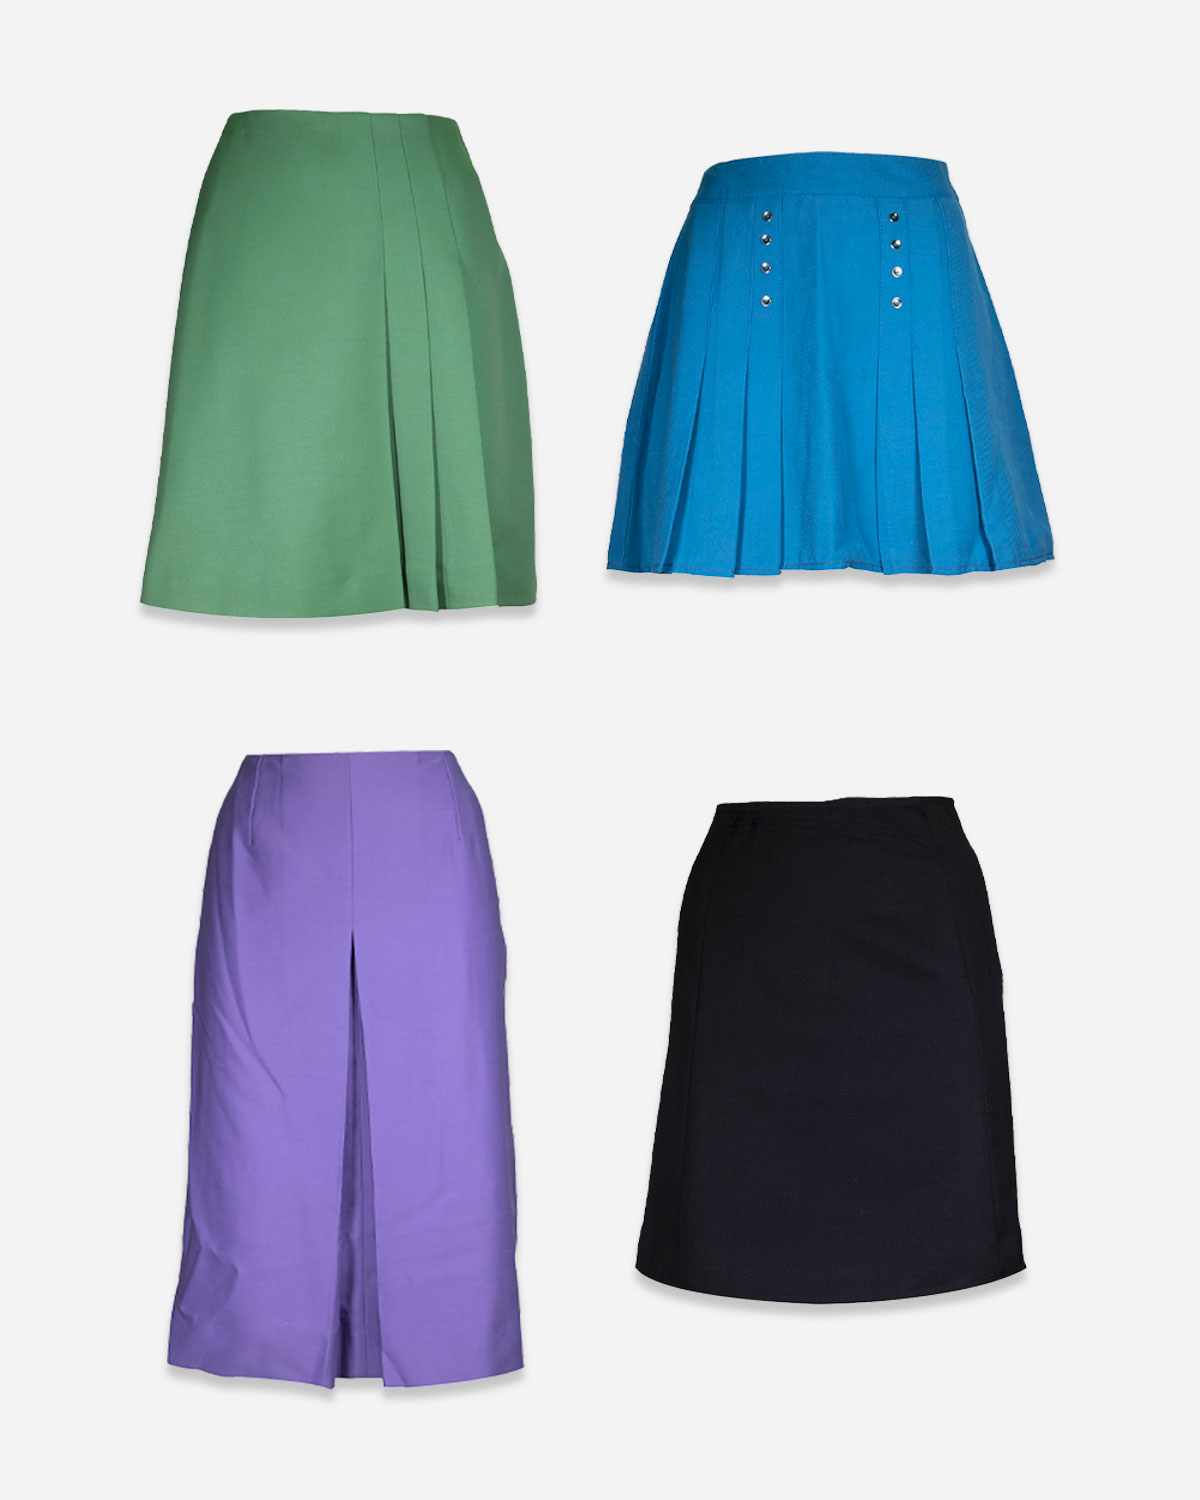 70s colored miniskirts: 4 pieces